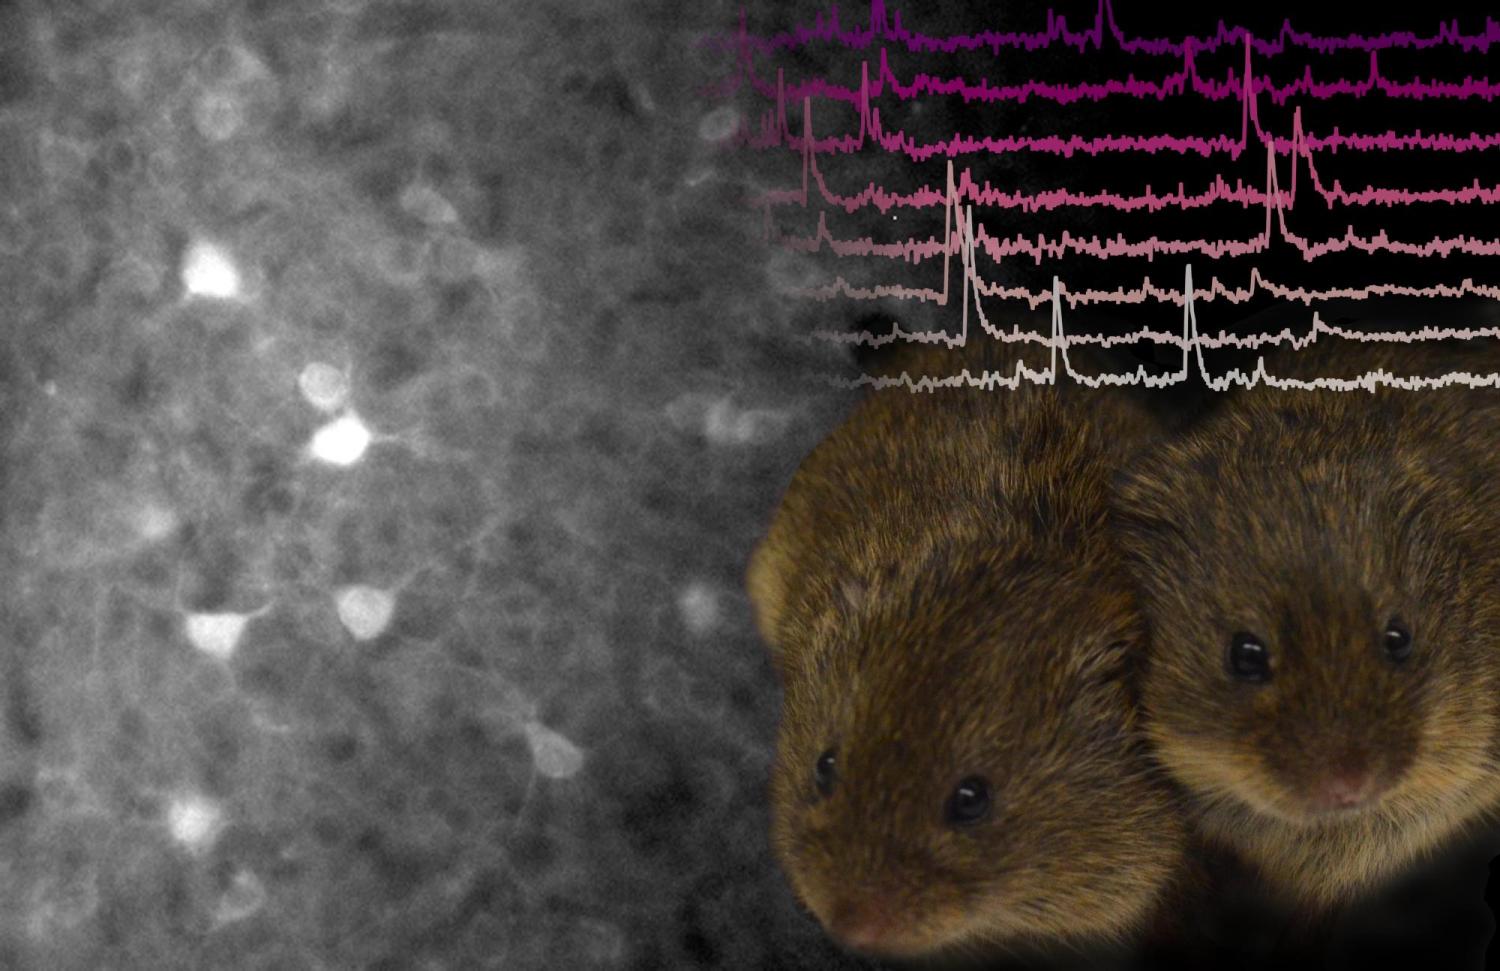 two voles next to an image of their brain activity